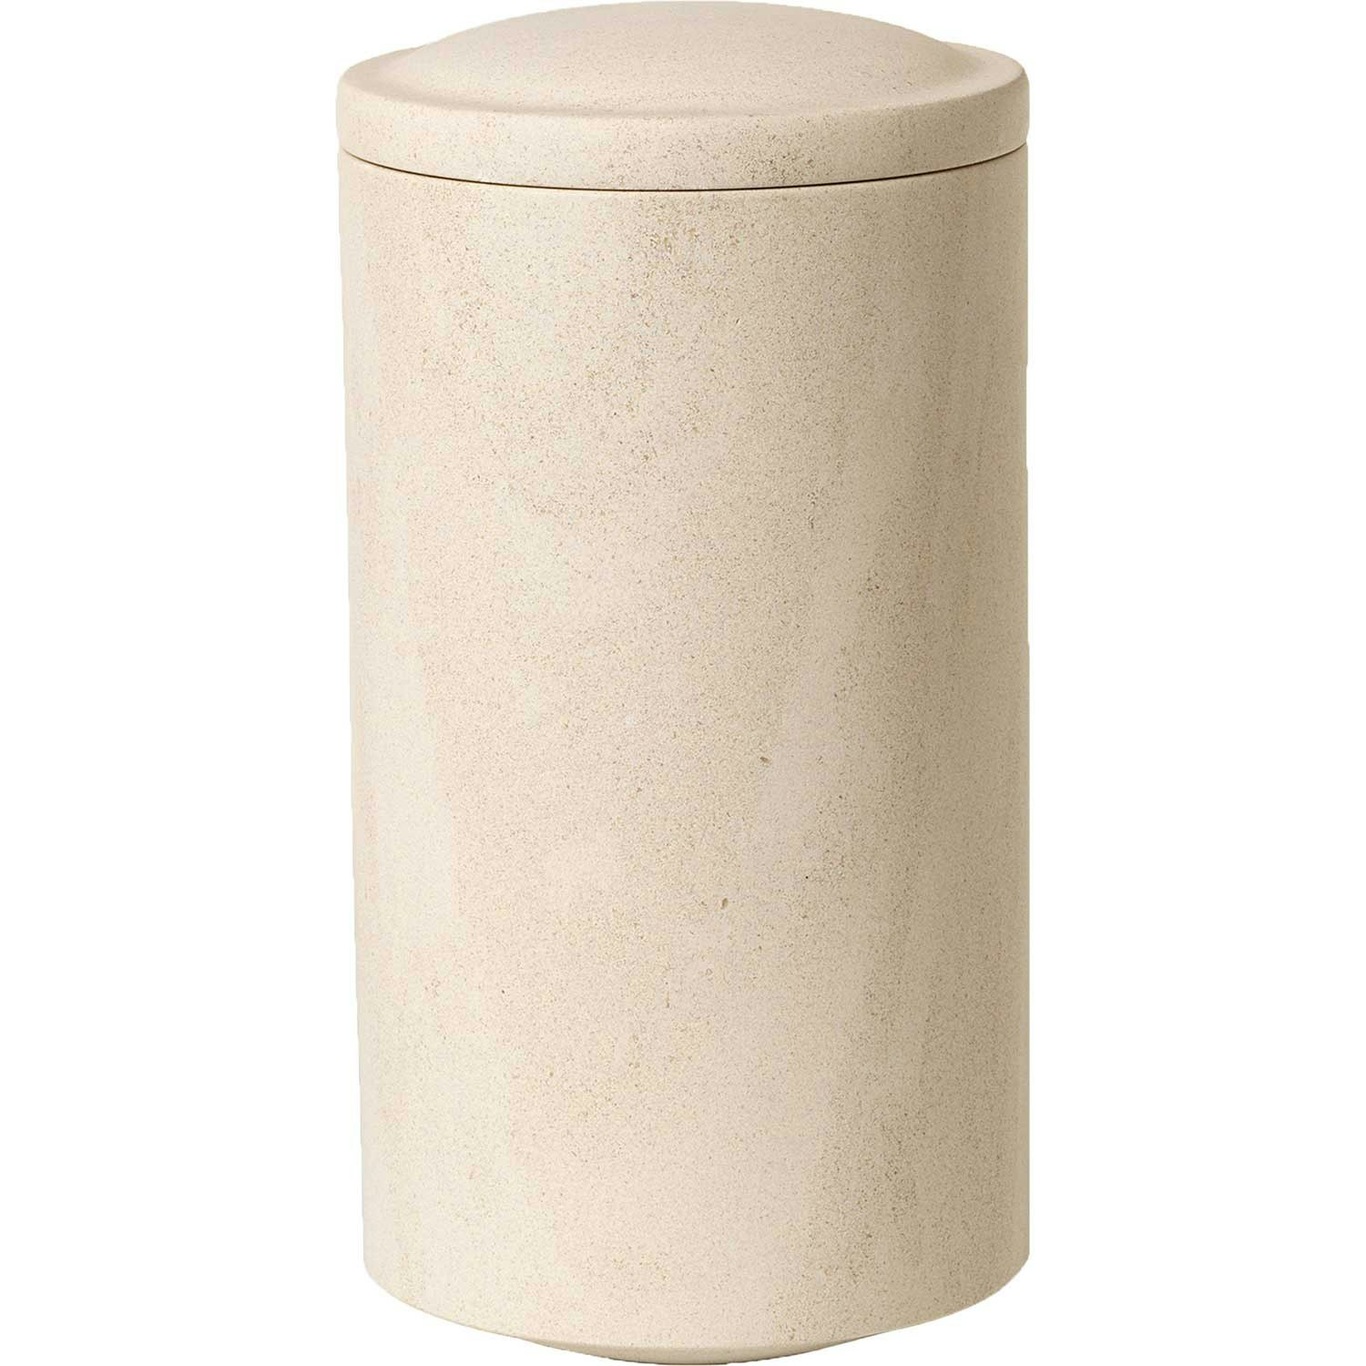 Gallery Objects 03 Jar 19 cm, Lime Stone